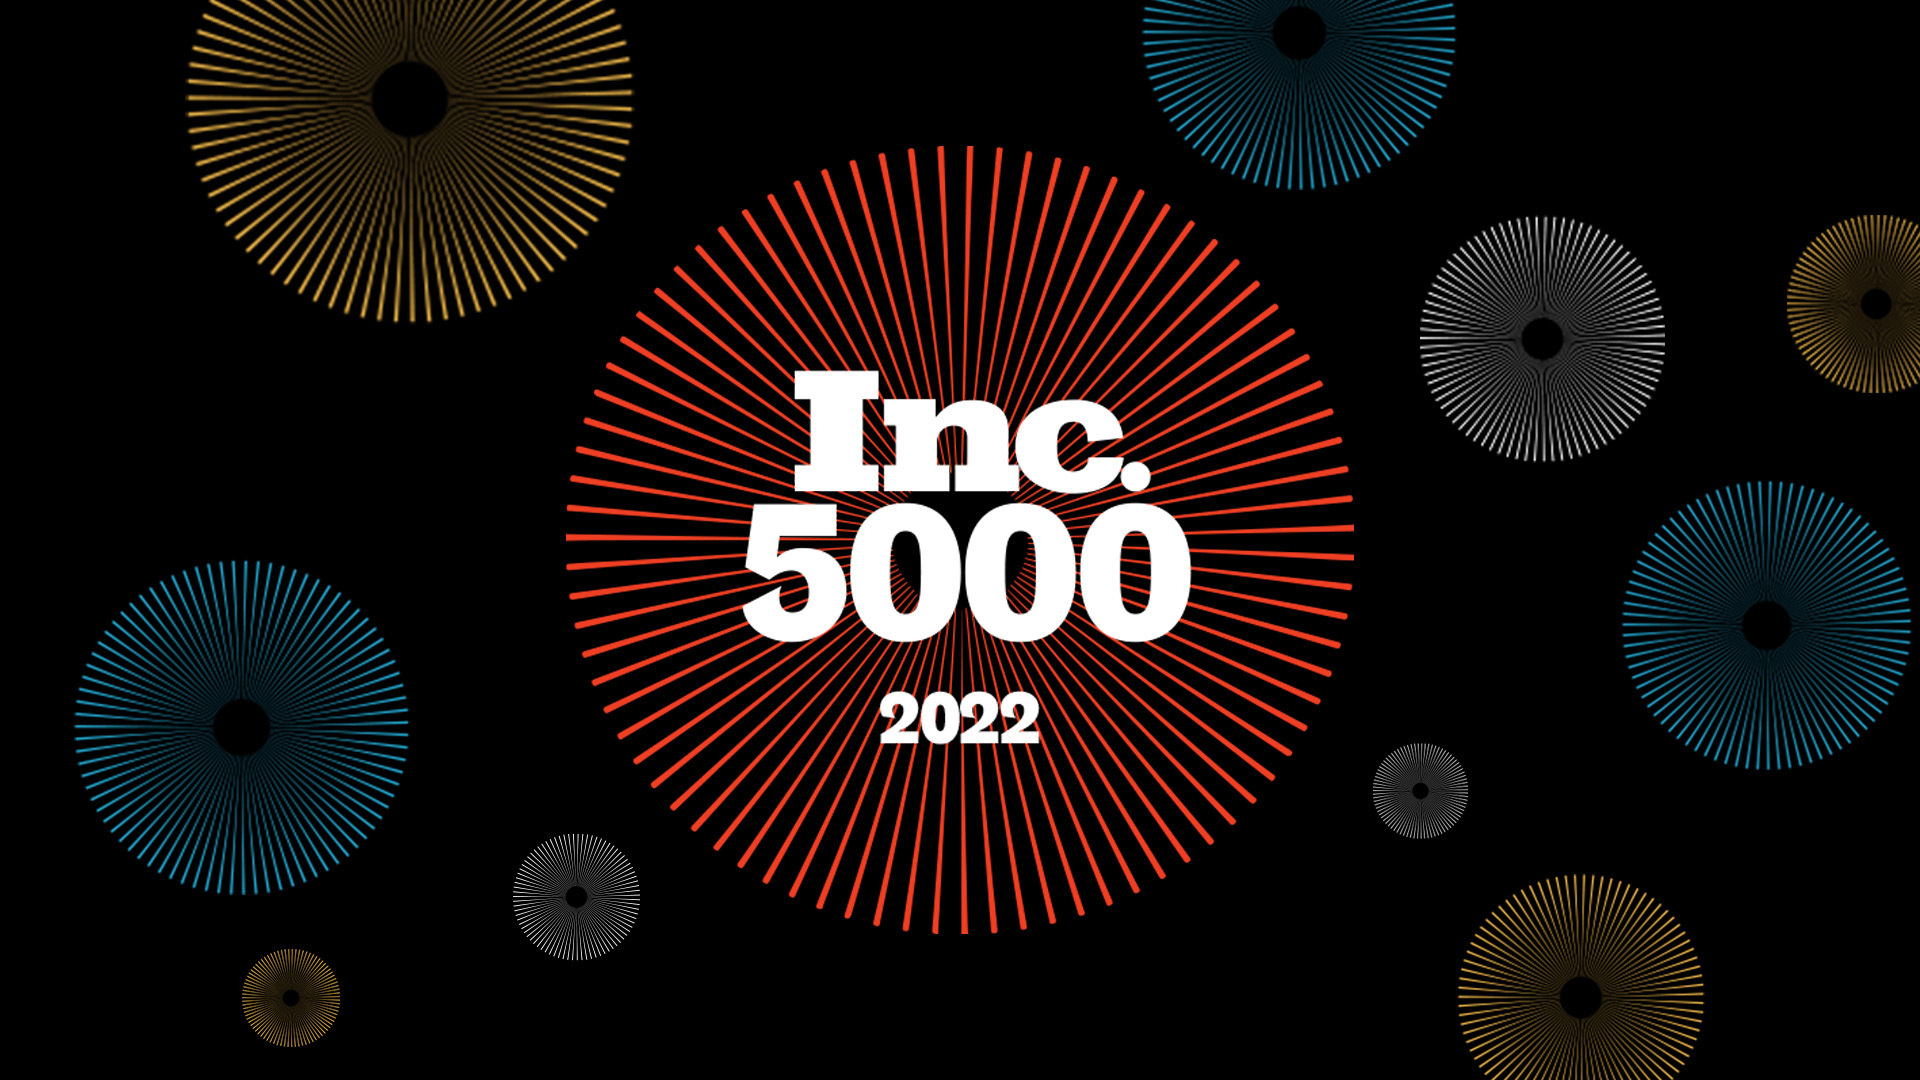 Grey Market Labs Ranks No. 1321 on the 2022 Inc. 5000 Annual List